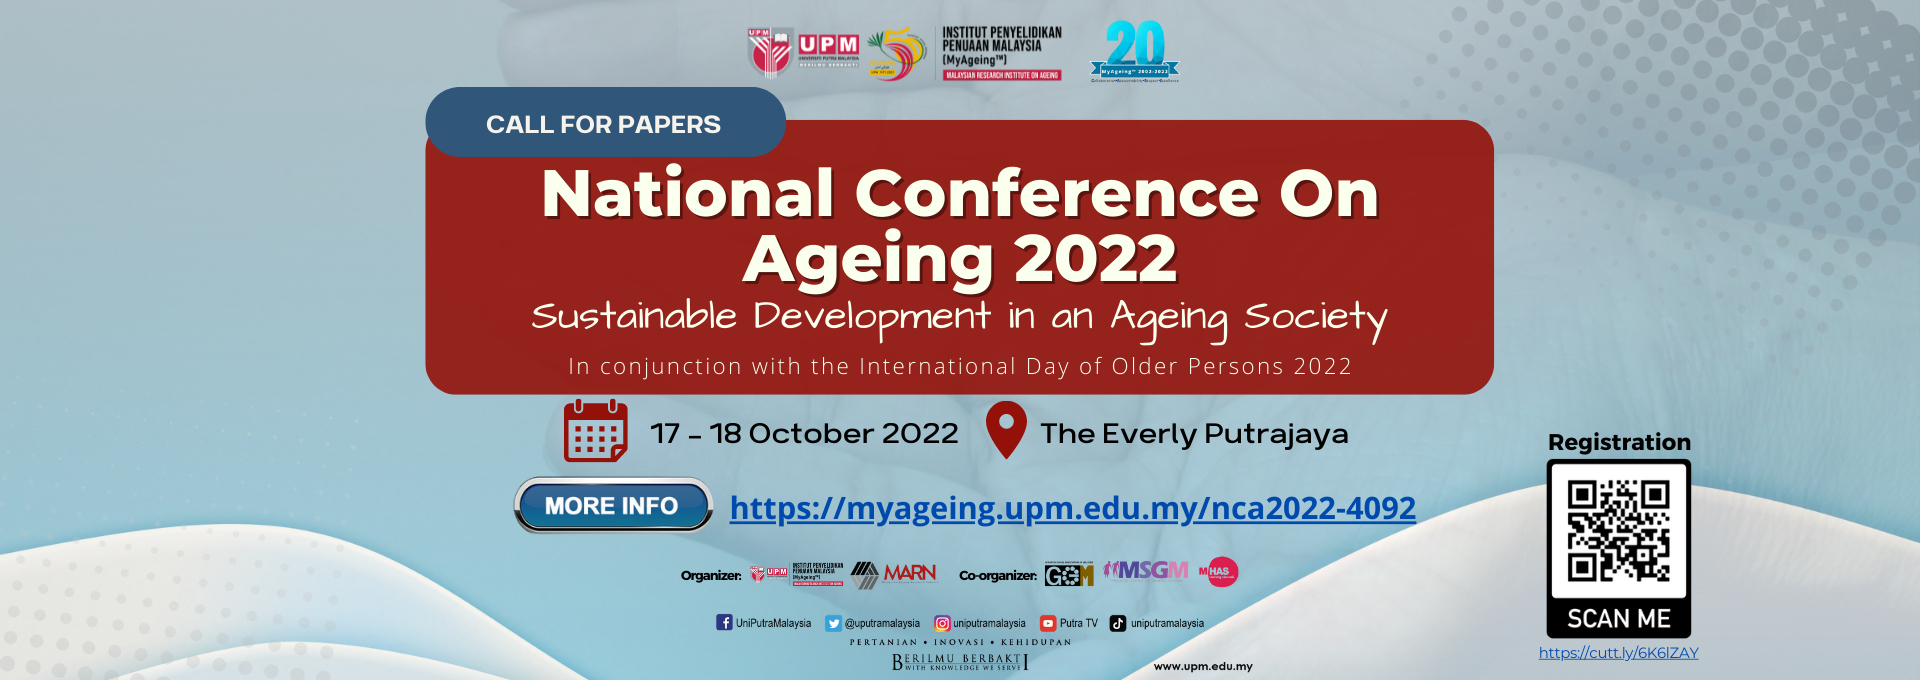 National Conference On Ageing 2022